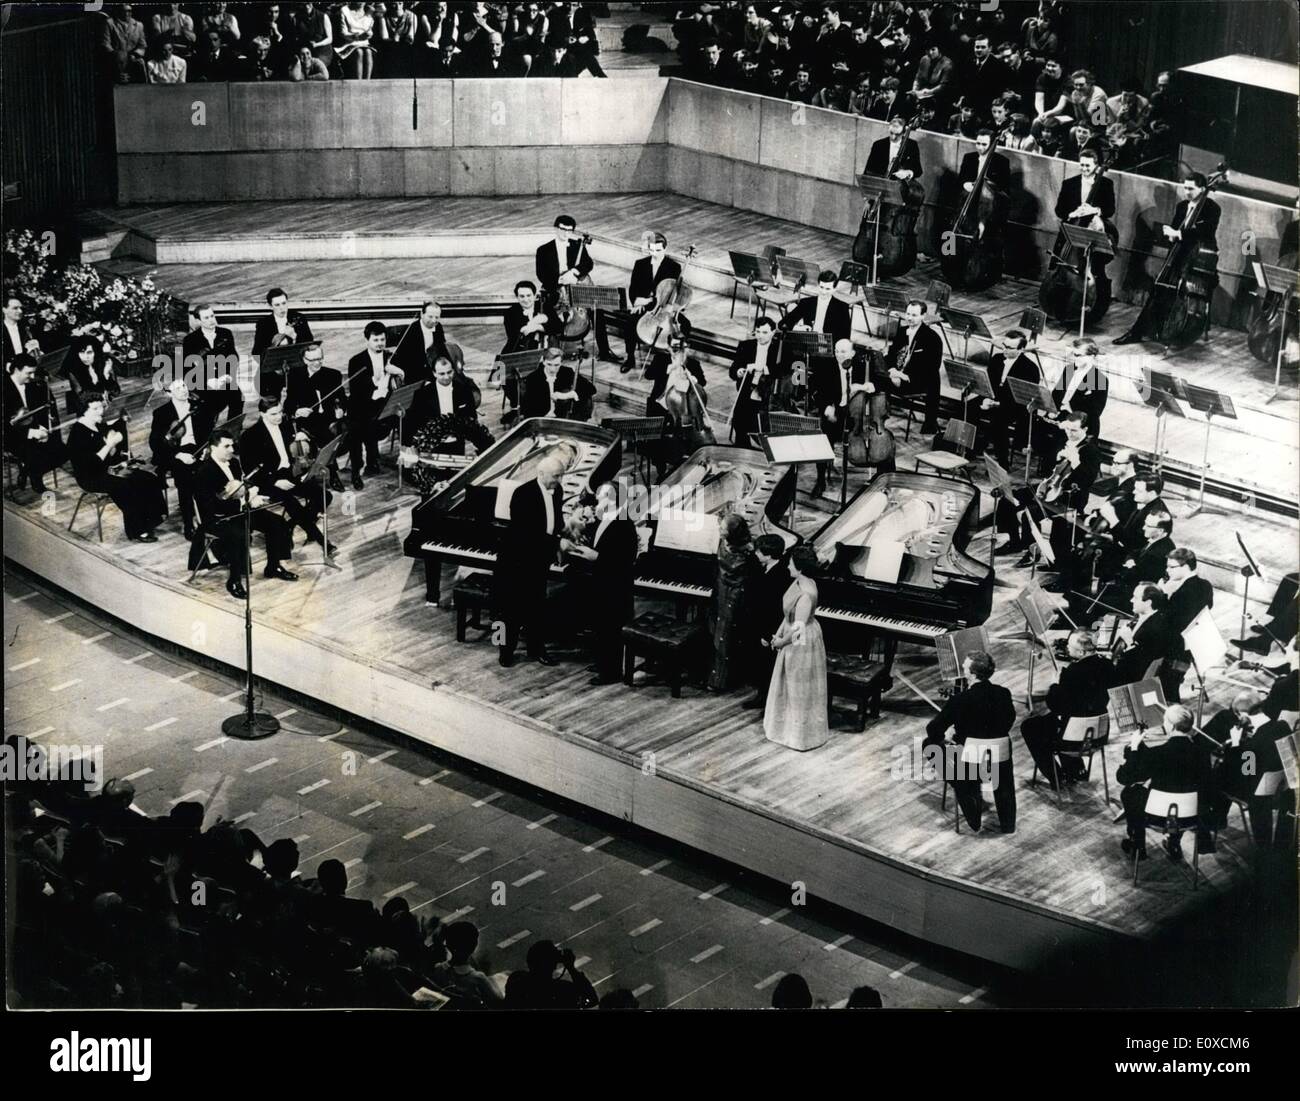 Apr. 04, 1966 - Yehudi Menuhin's Fiftieth Birthday Concert: The famous violinist Yehudi Menuhin's Fiftieth Birthday Concert, took place last night at the Royal Festival Hall, in aid of his music school at Stake D'Abernon. During the concert, Yehudi Menuhin conducted his two sisters, Yaltah and Hephzibah Menuhin and his 14-year old son Jeremy in the Mezart three-piano concerts. The concert also marked Jeremy's London debut as a concert pianist. Photo shows Sir Adrian Boult hands Yehudi Menuhin a cheque for the Yehudi Menuhin Music School, at the Royal Festival Hall last night. Stock Photo